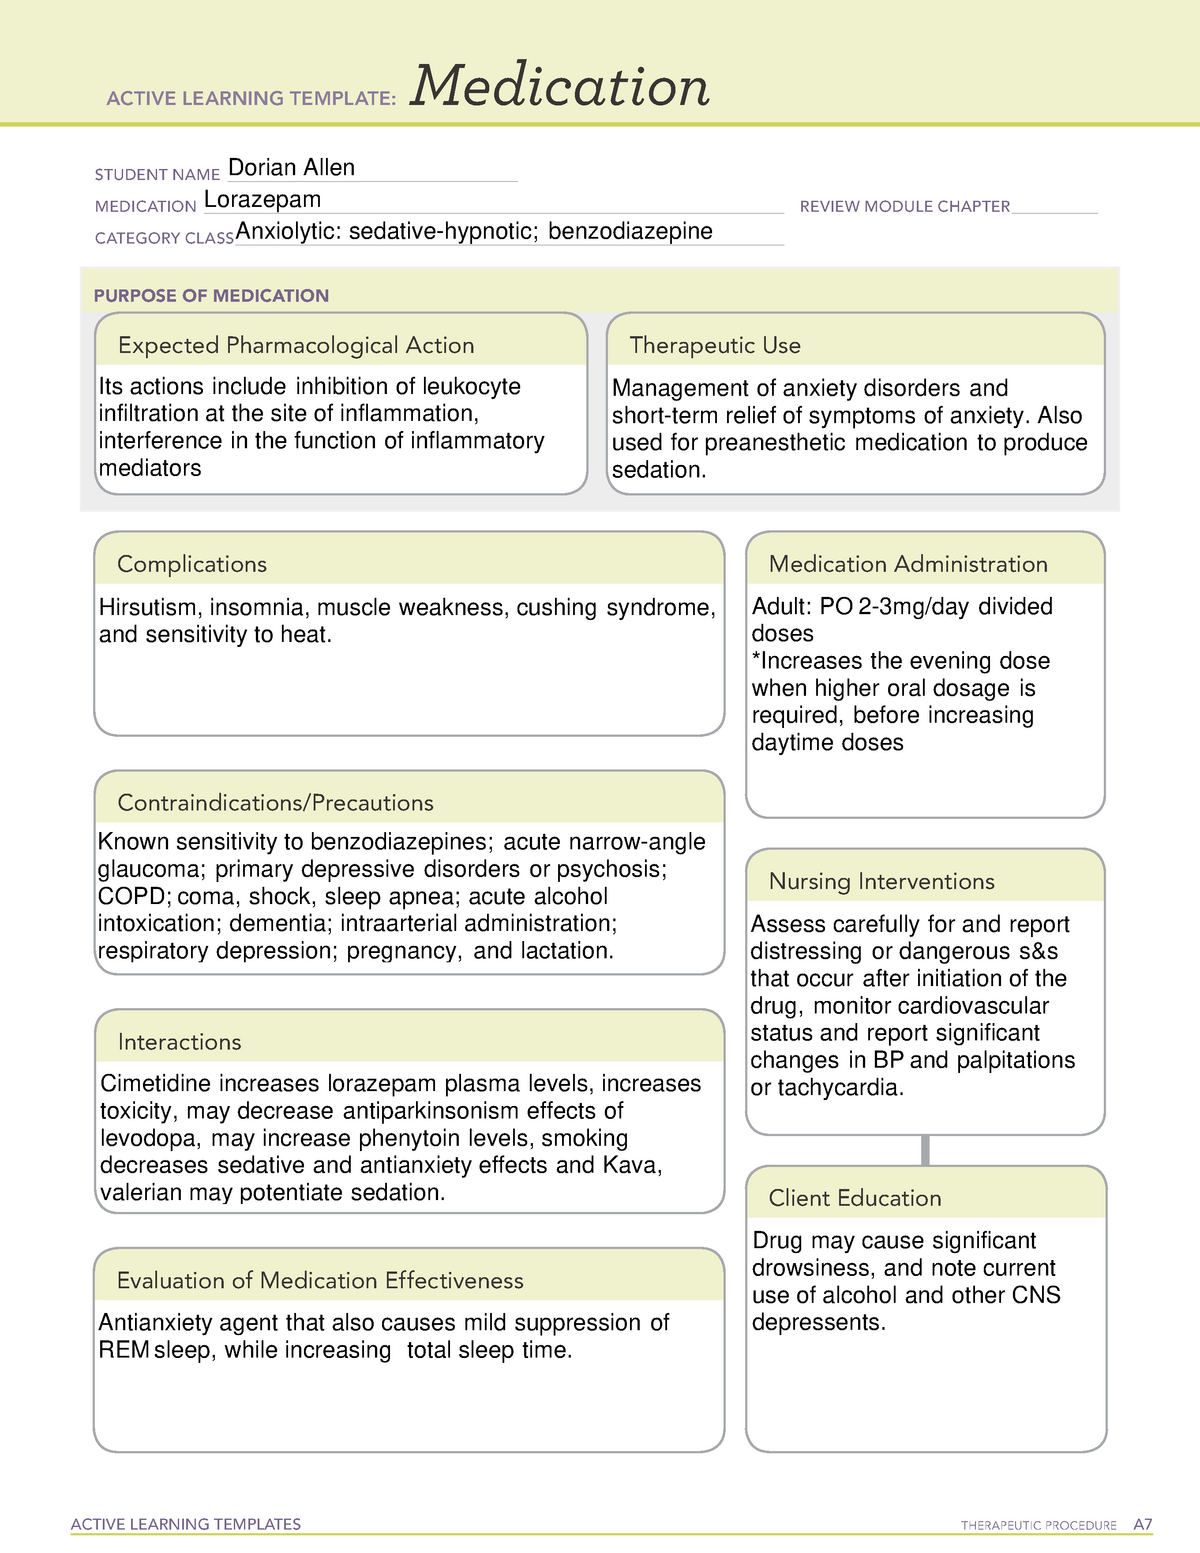 Week 8 Lorazepam ACTIVE LEARNING TEMPLATES THERAPEUTIC PROCEDURE A Medication STUDENT NAME